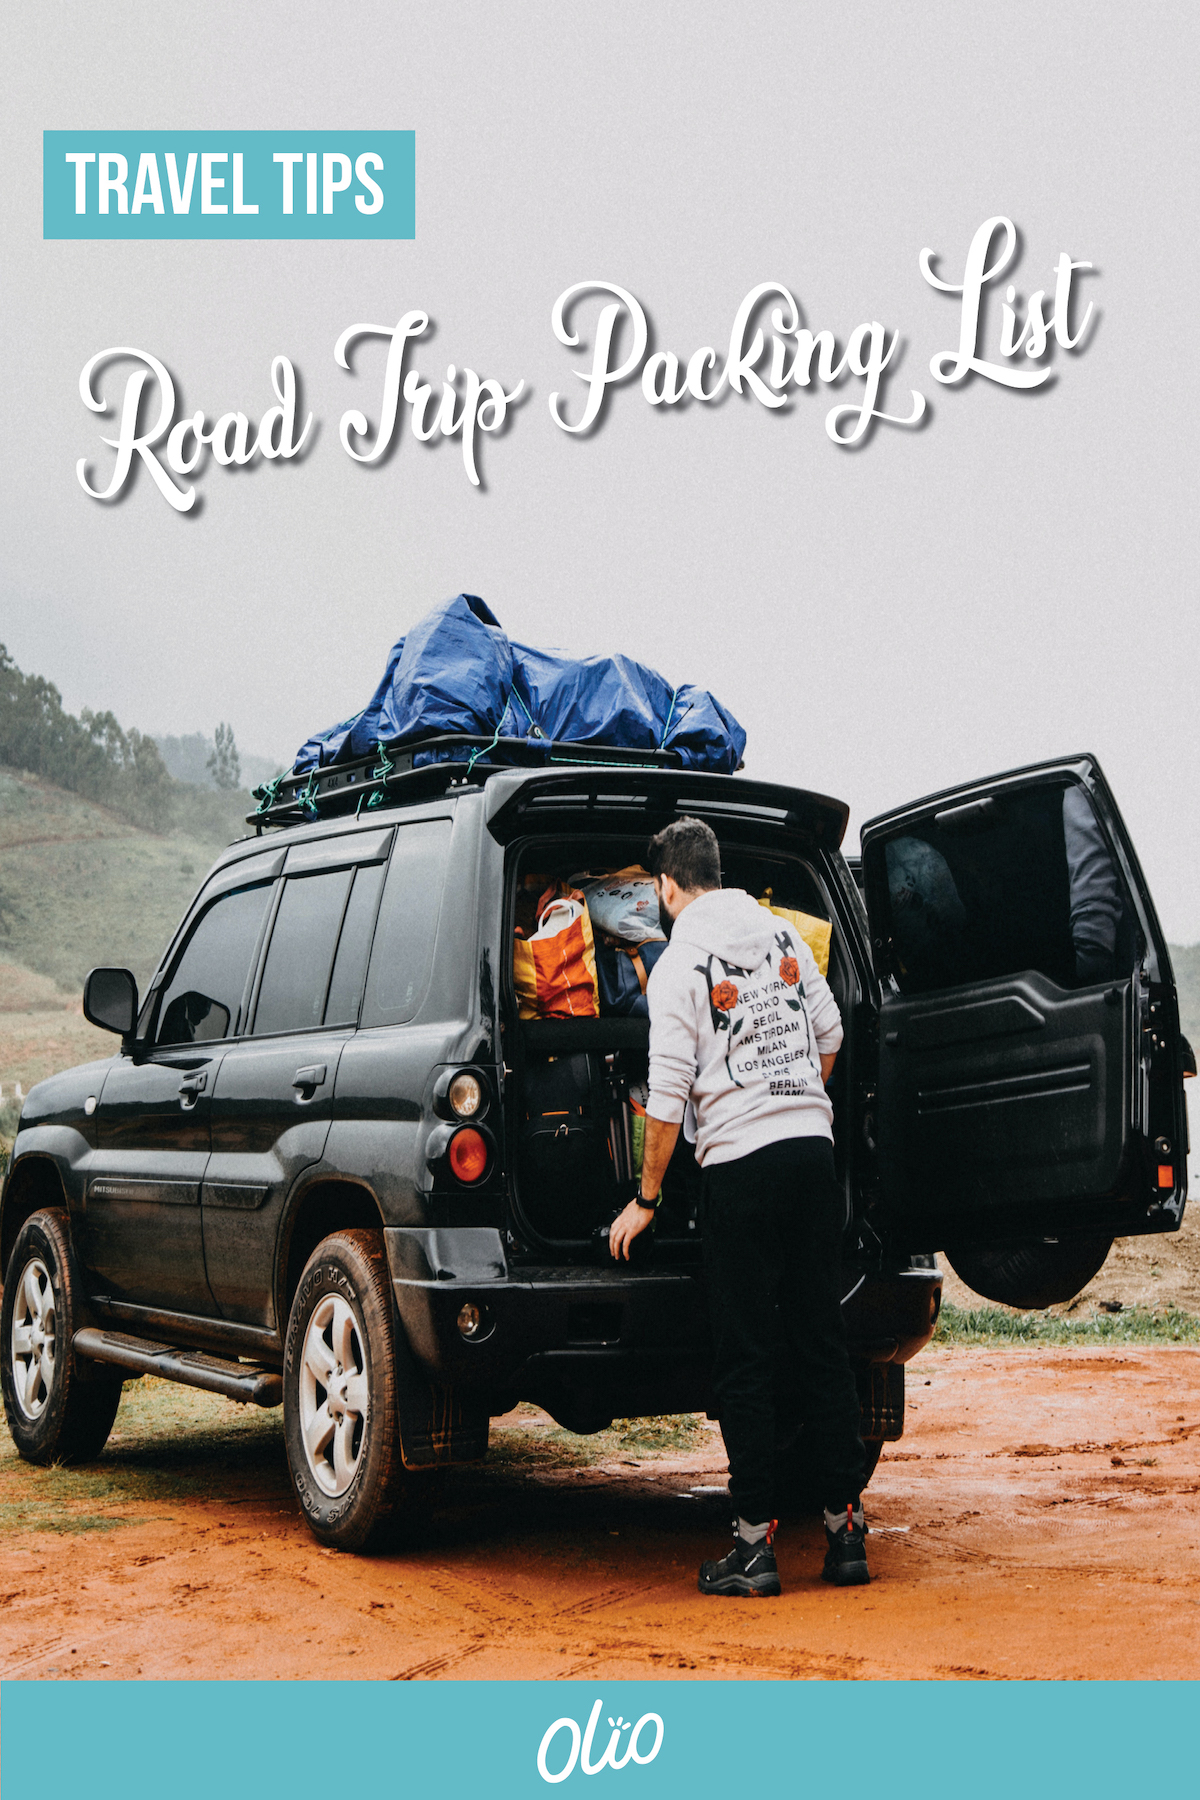 If you’re planning to hit the road this year, now is the perfect time to start thinking about your road trip packing list. Whether you’re driving cross country or just heading on a weekend away, it’s important to know what to pack for a road trip. This guide covers all the things that should be on your road trip packing list, from an emergency car kit to little luxuries to make the journey more comfortable.